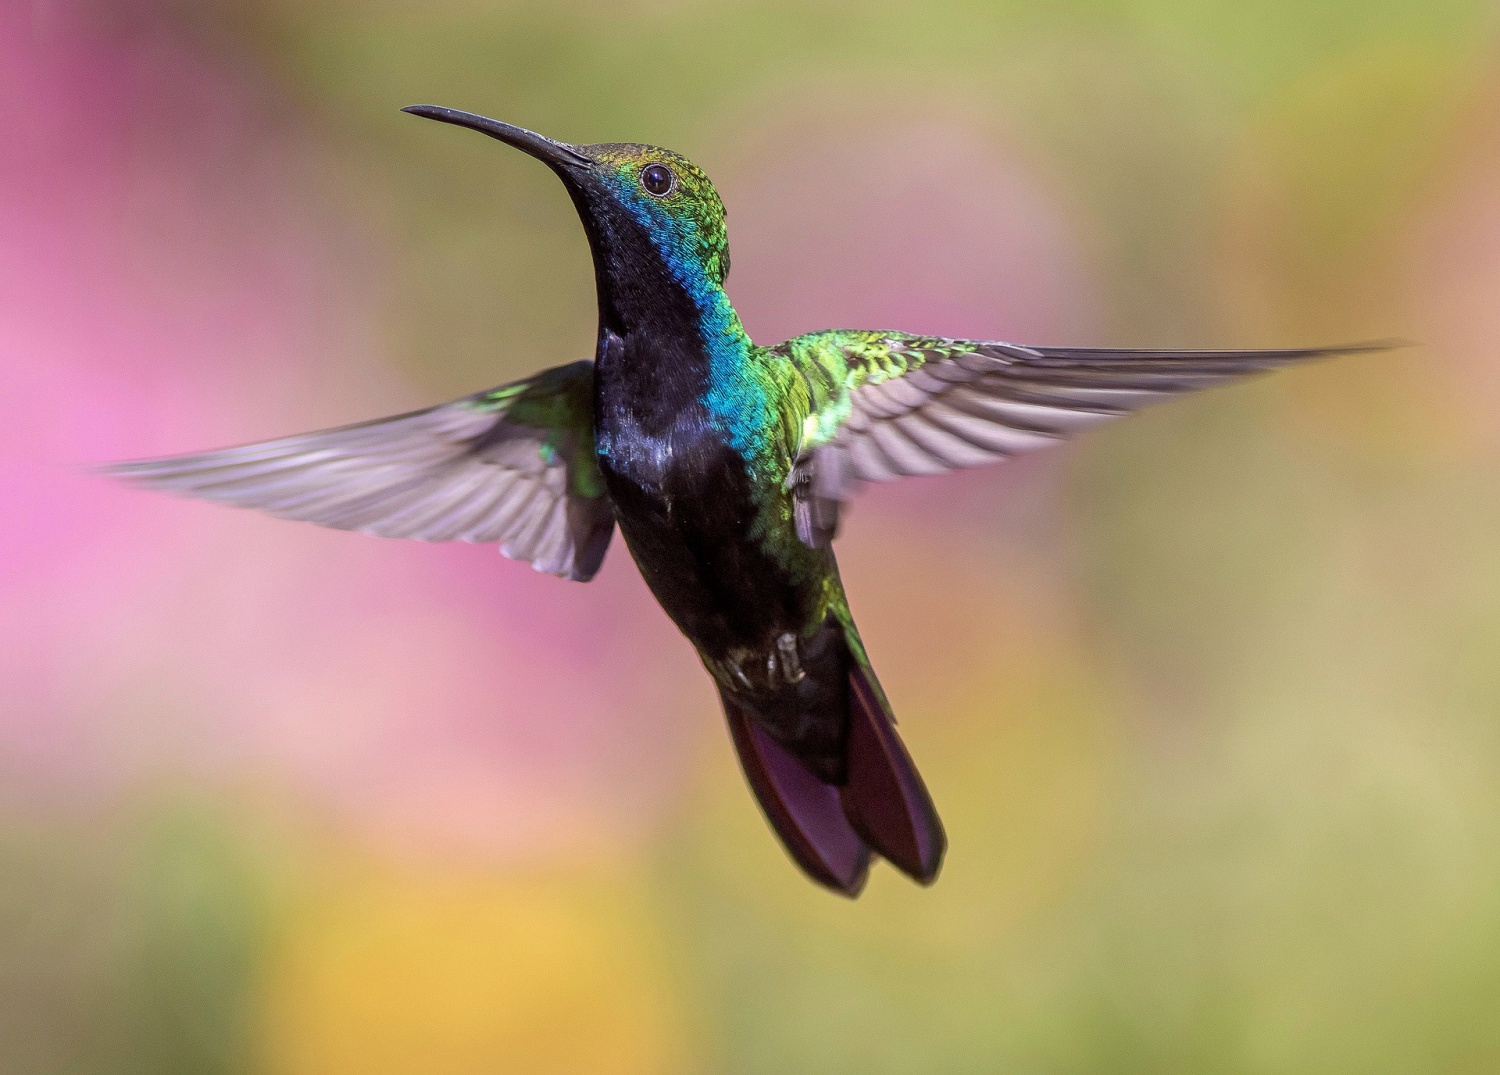 Hummingbirds Can See More Colors With Greater Spectrum Than Human Eye